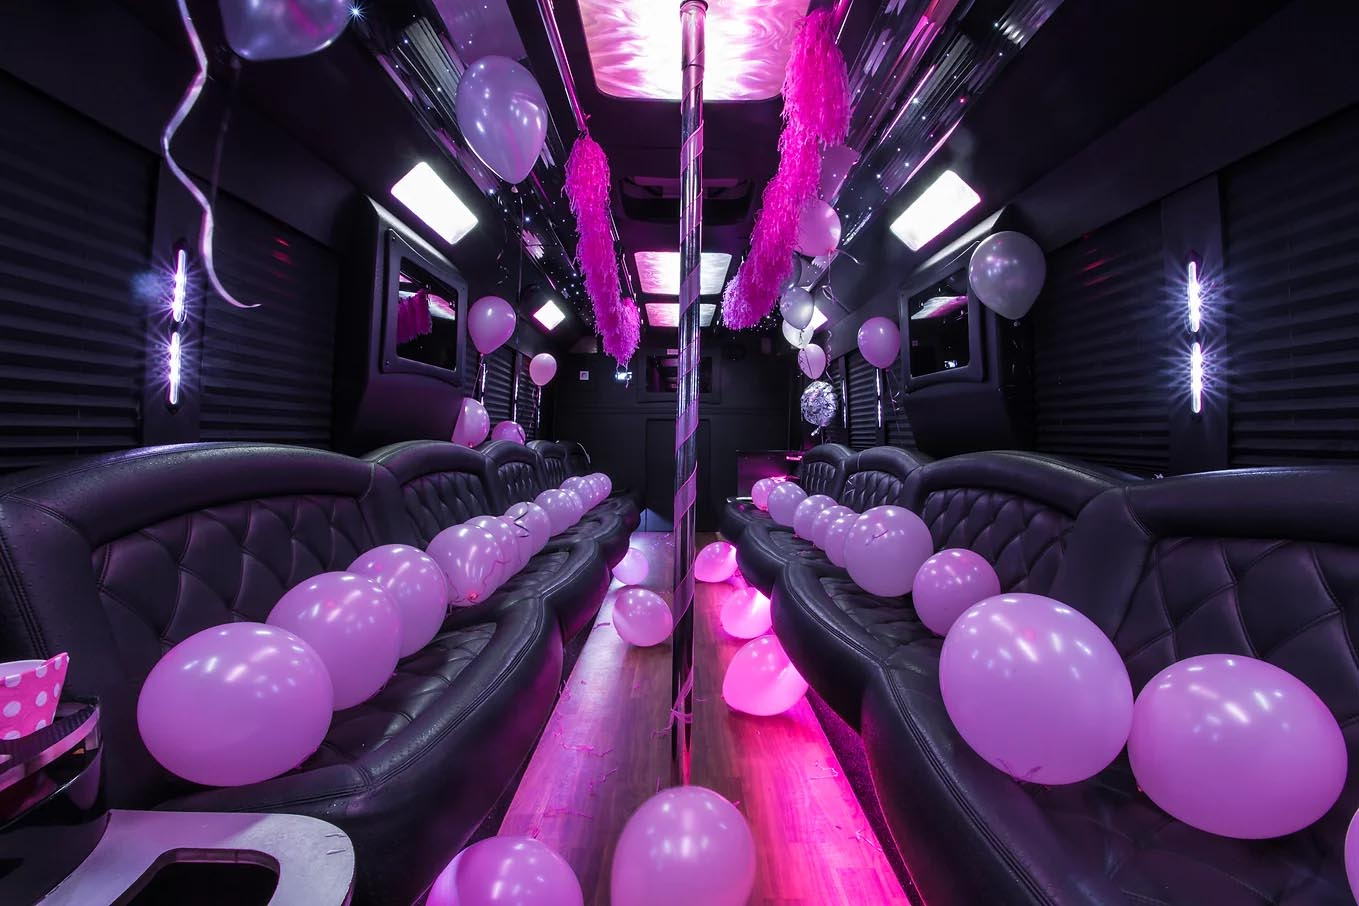 Amazing Arrangement Ideas for a Birthday Party in a Limo!